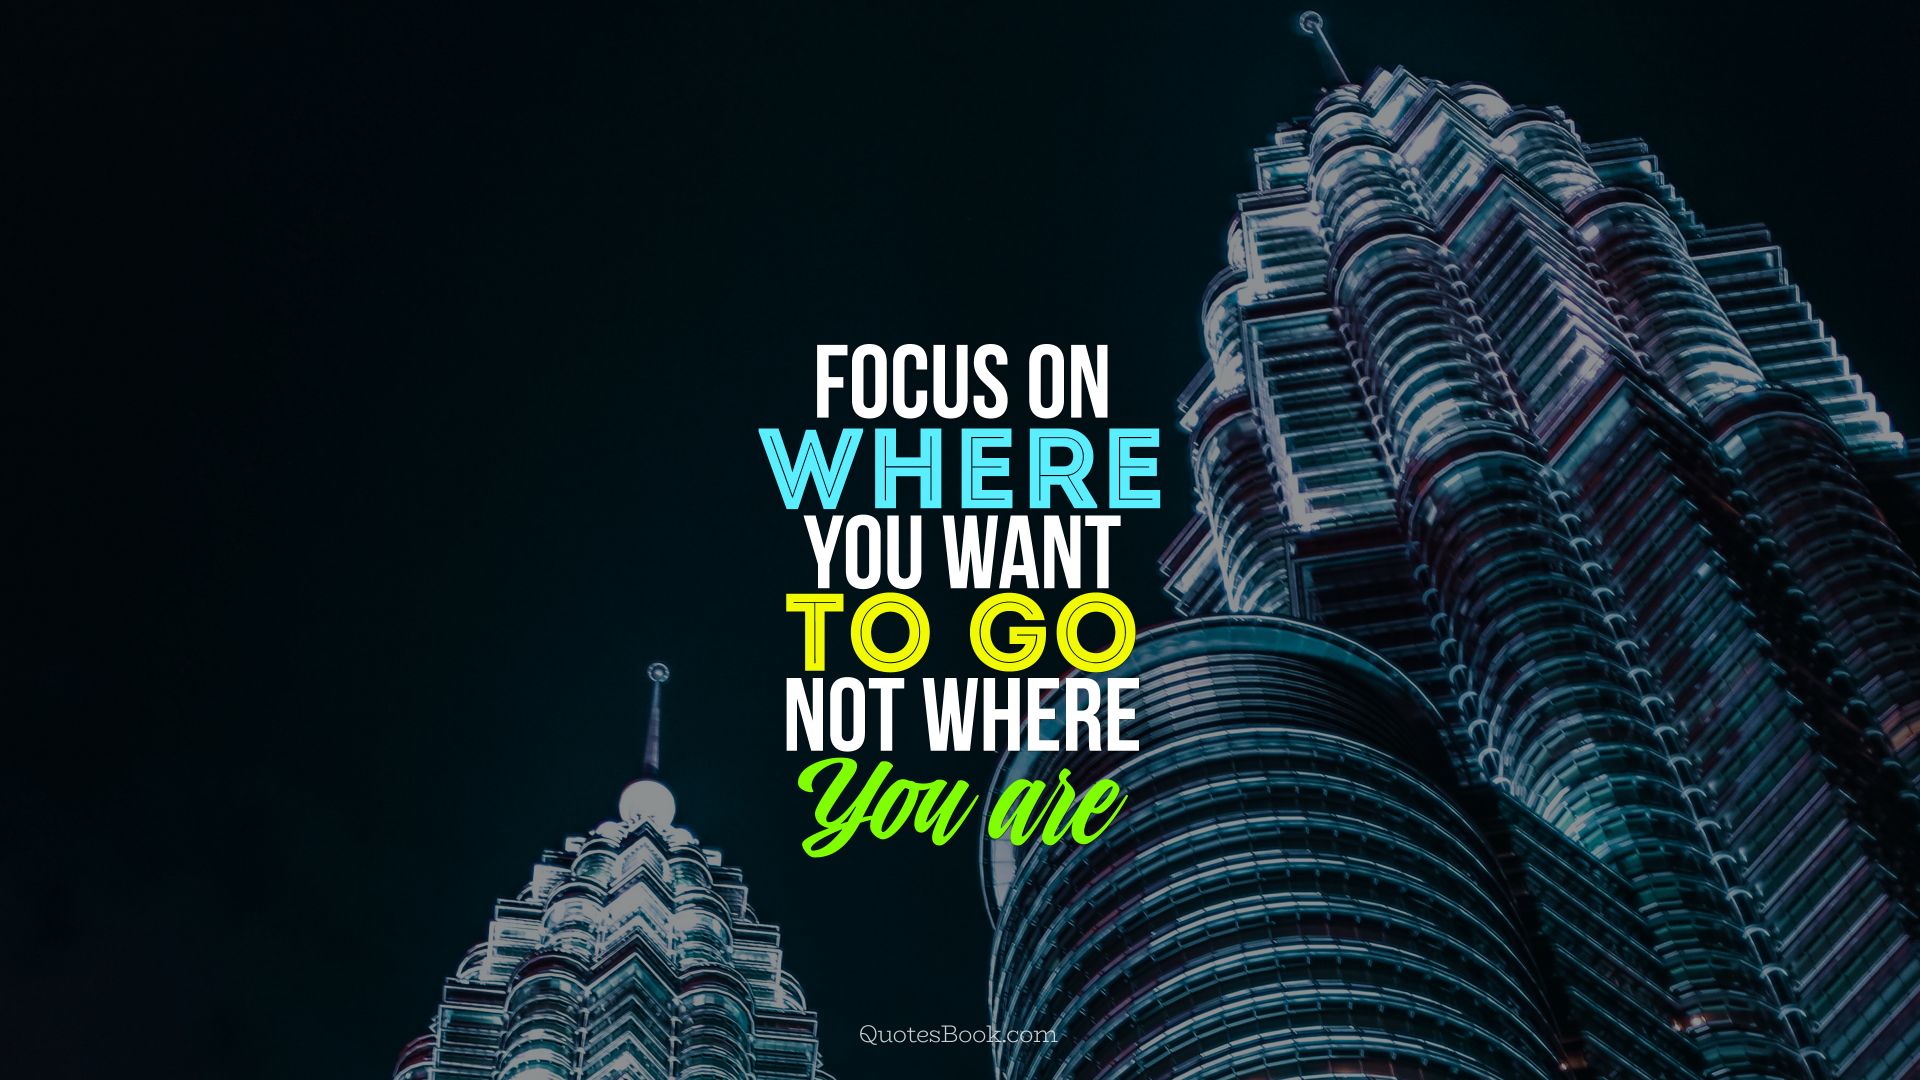 Focus on where you want to go, not where you are